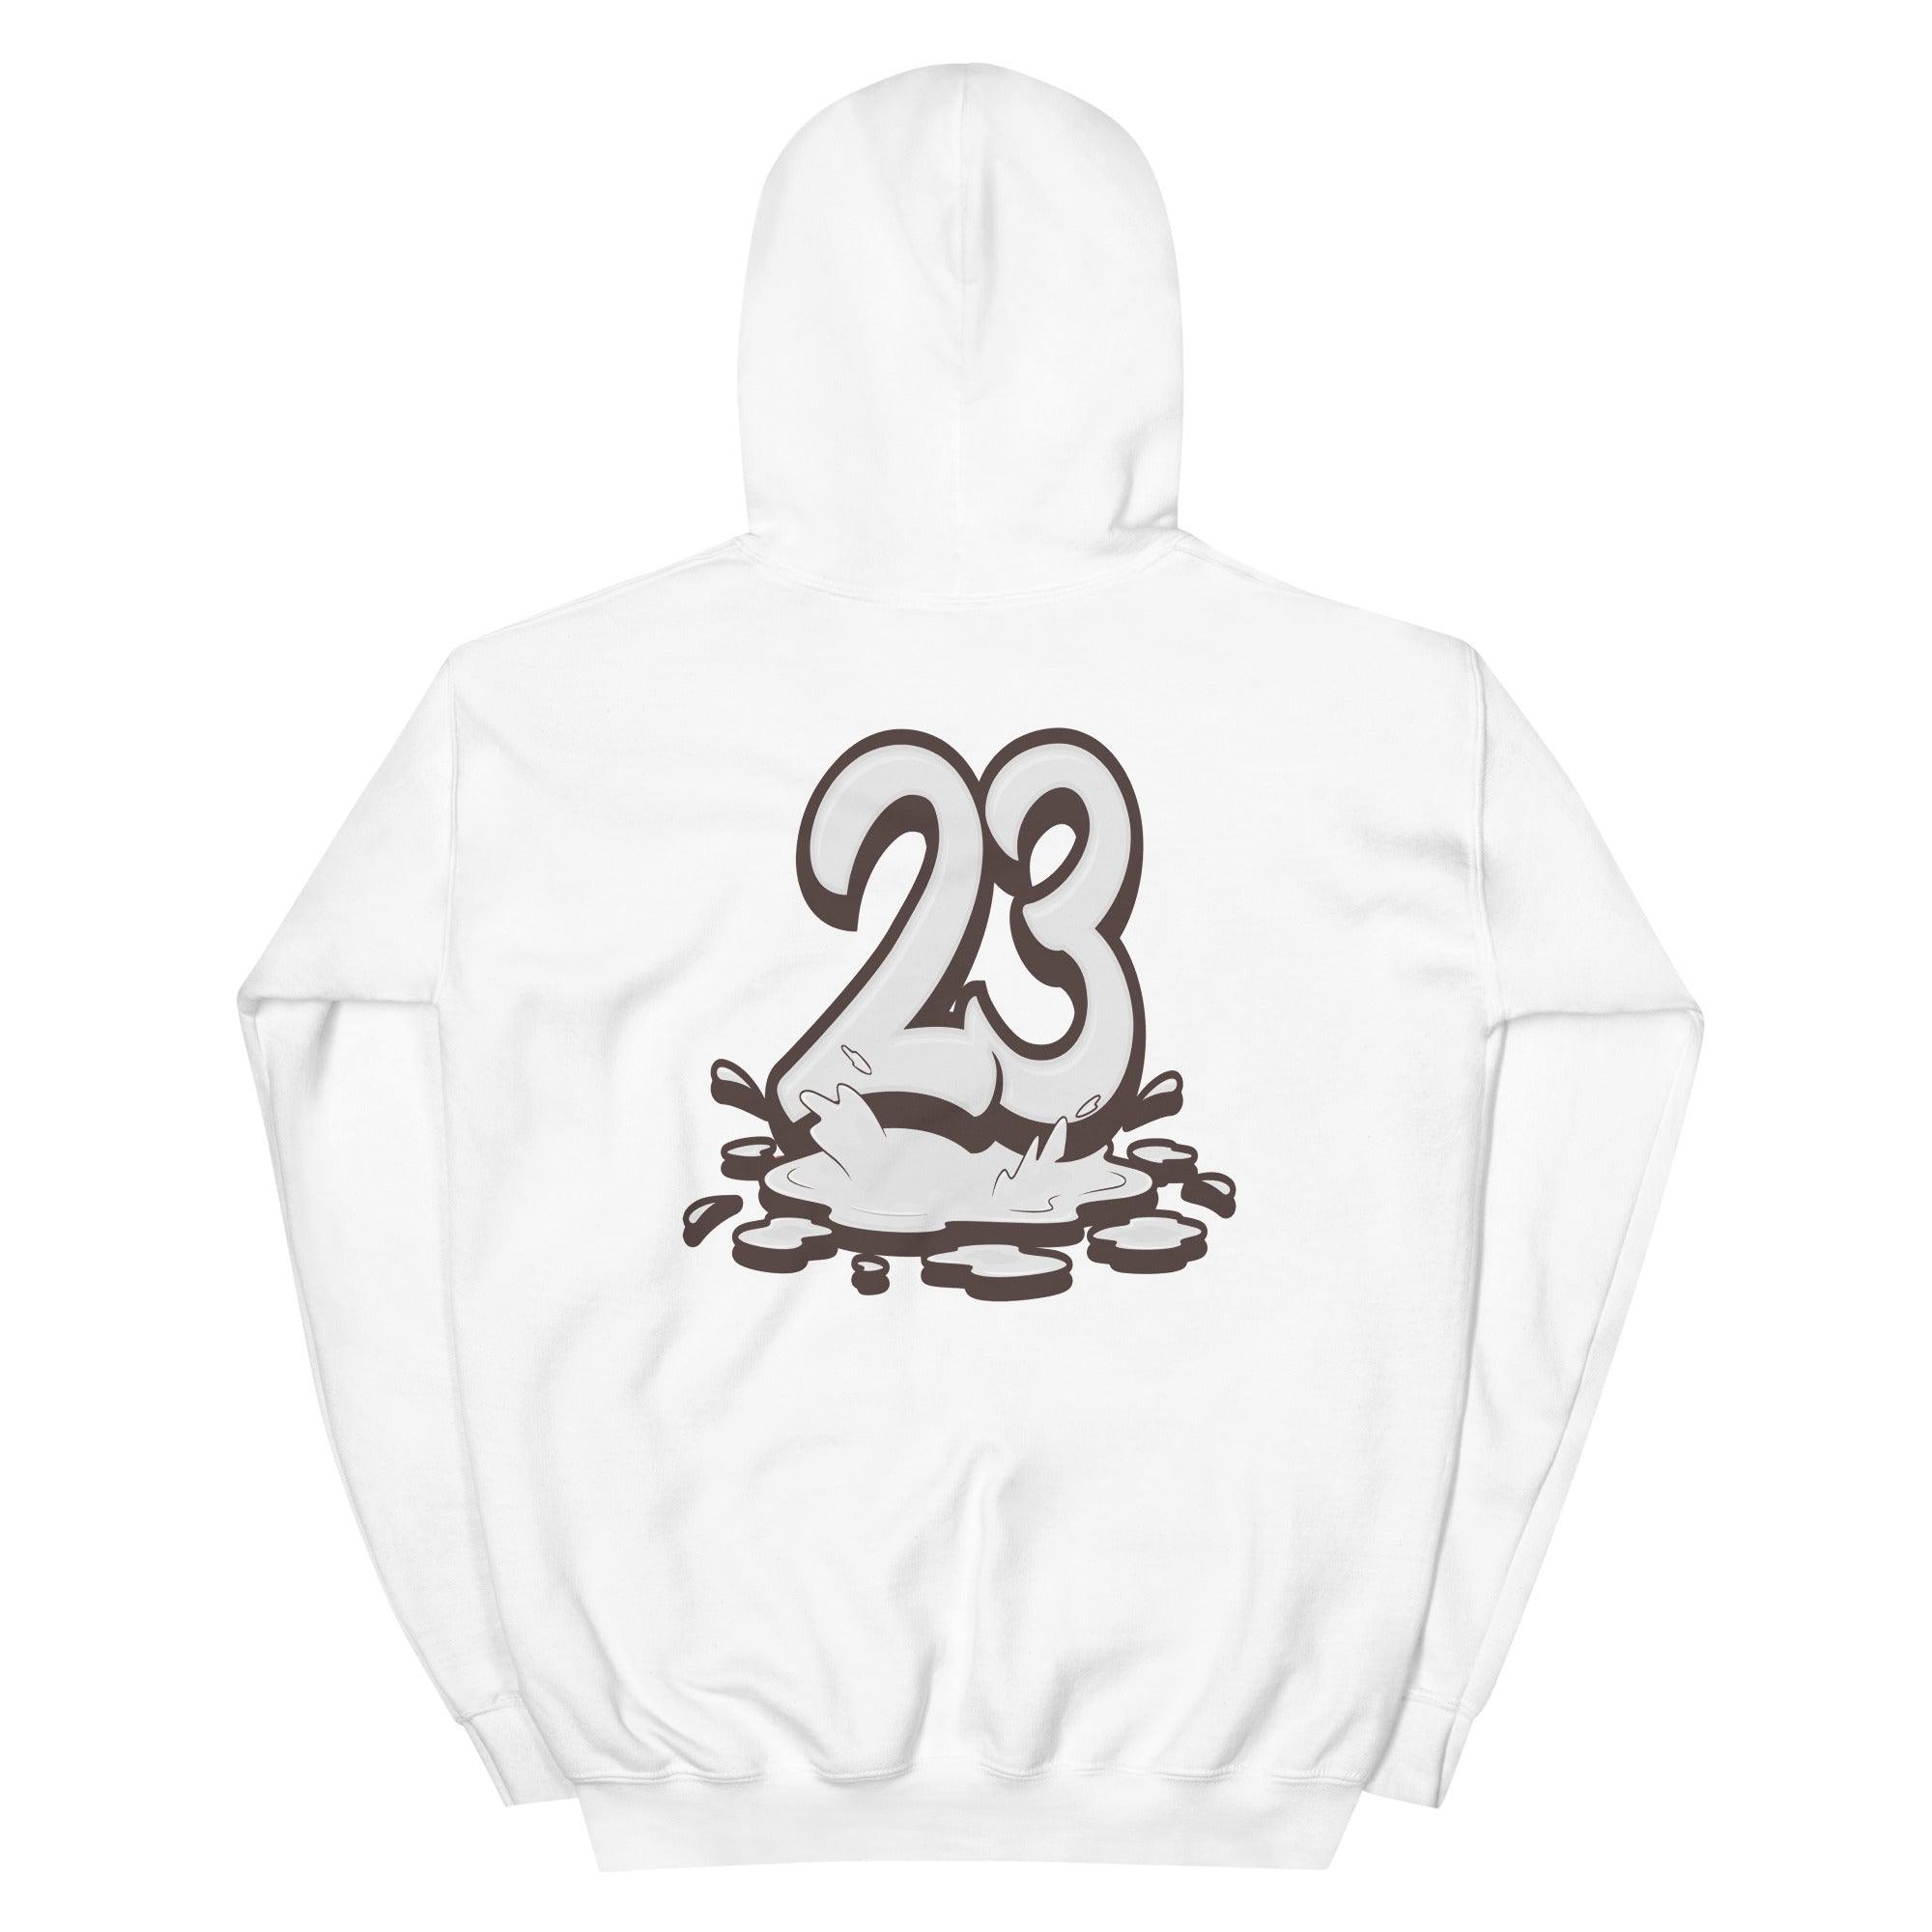 Number 23 Melting Hoodie Nike Air Force 1 Low White Chocolate photo